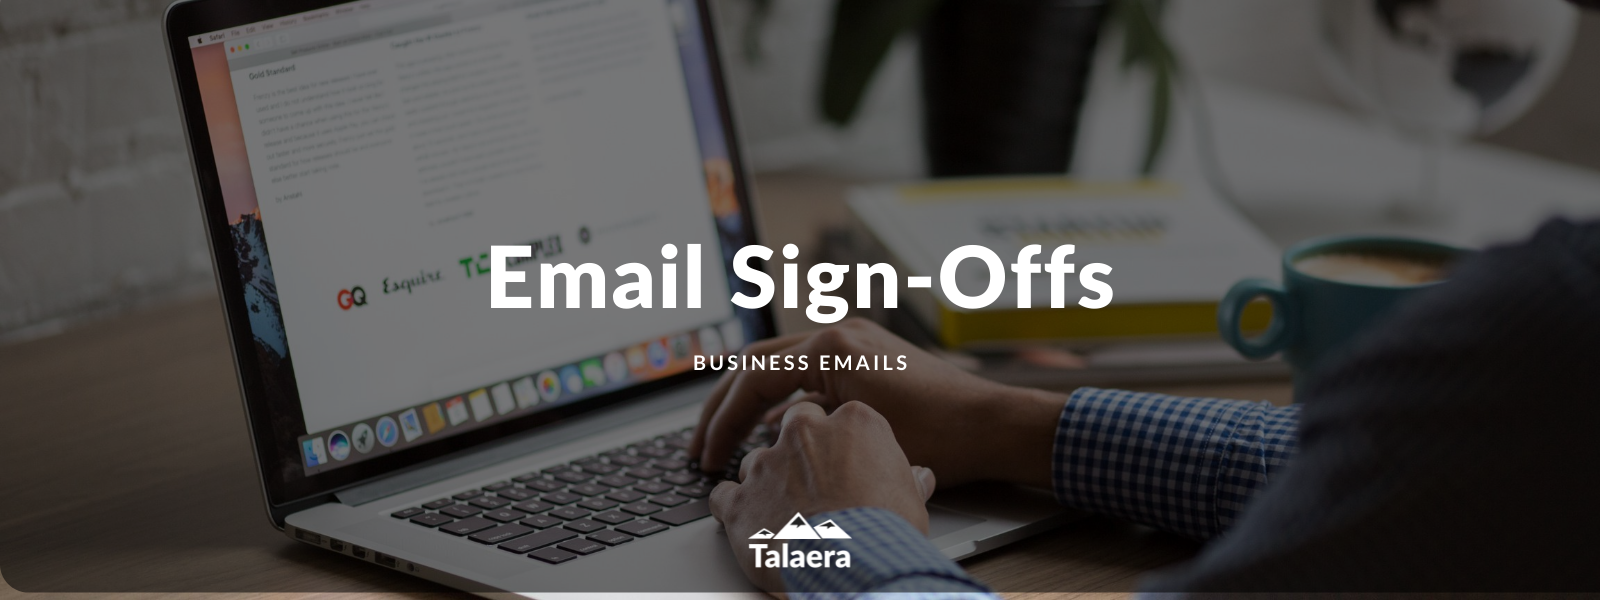 Email Sign-Offs and what they mean - Talaera Blog